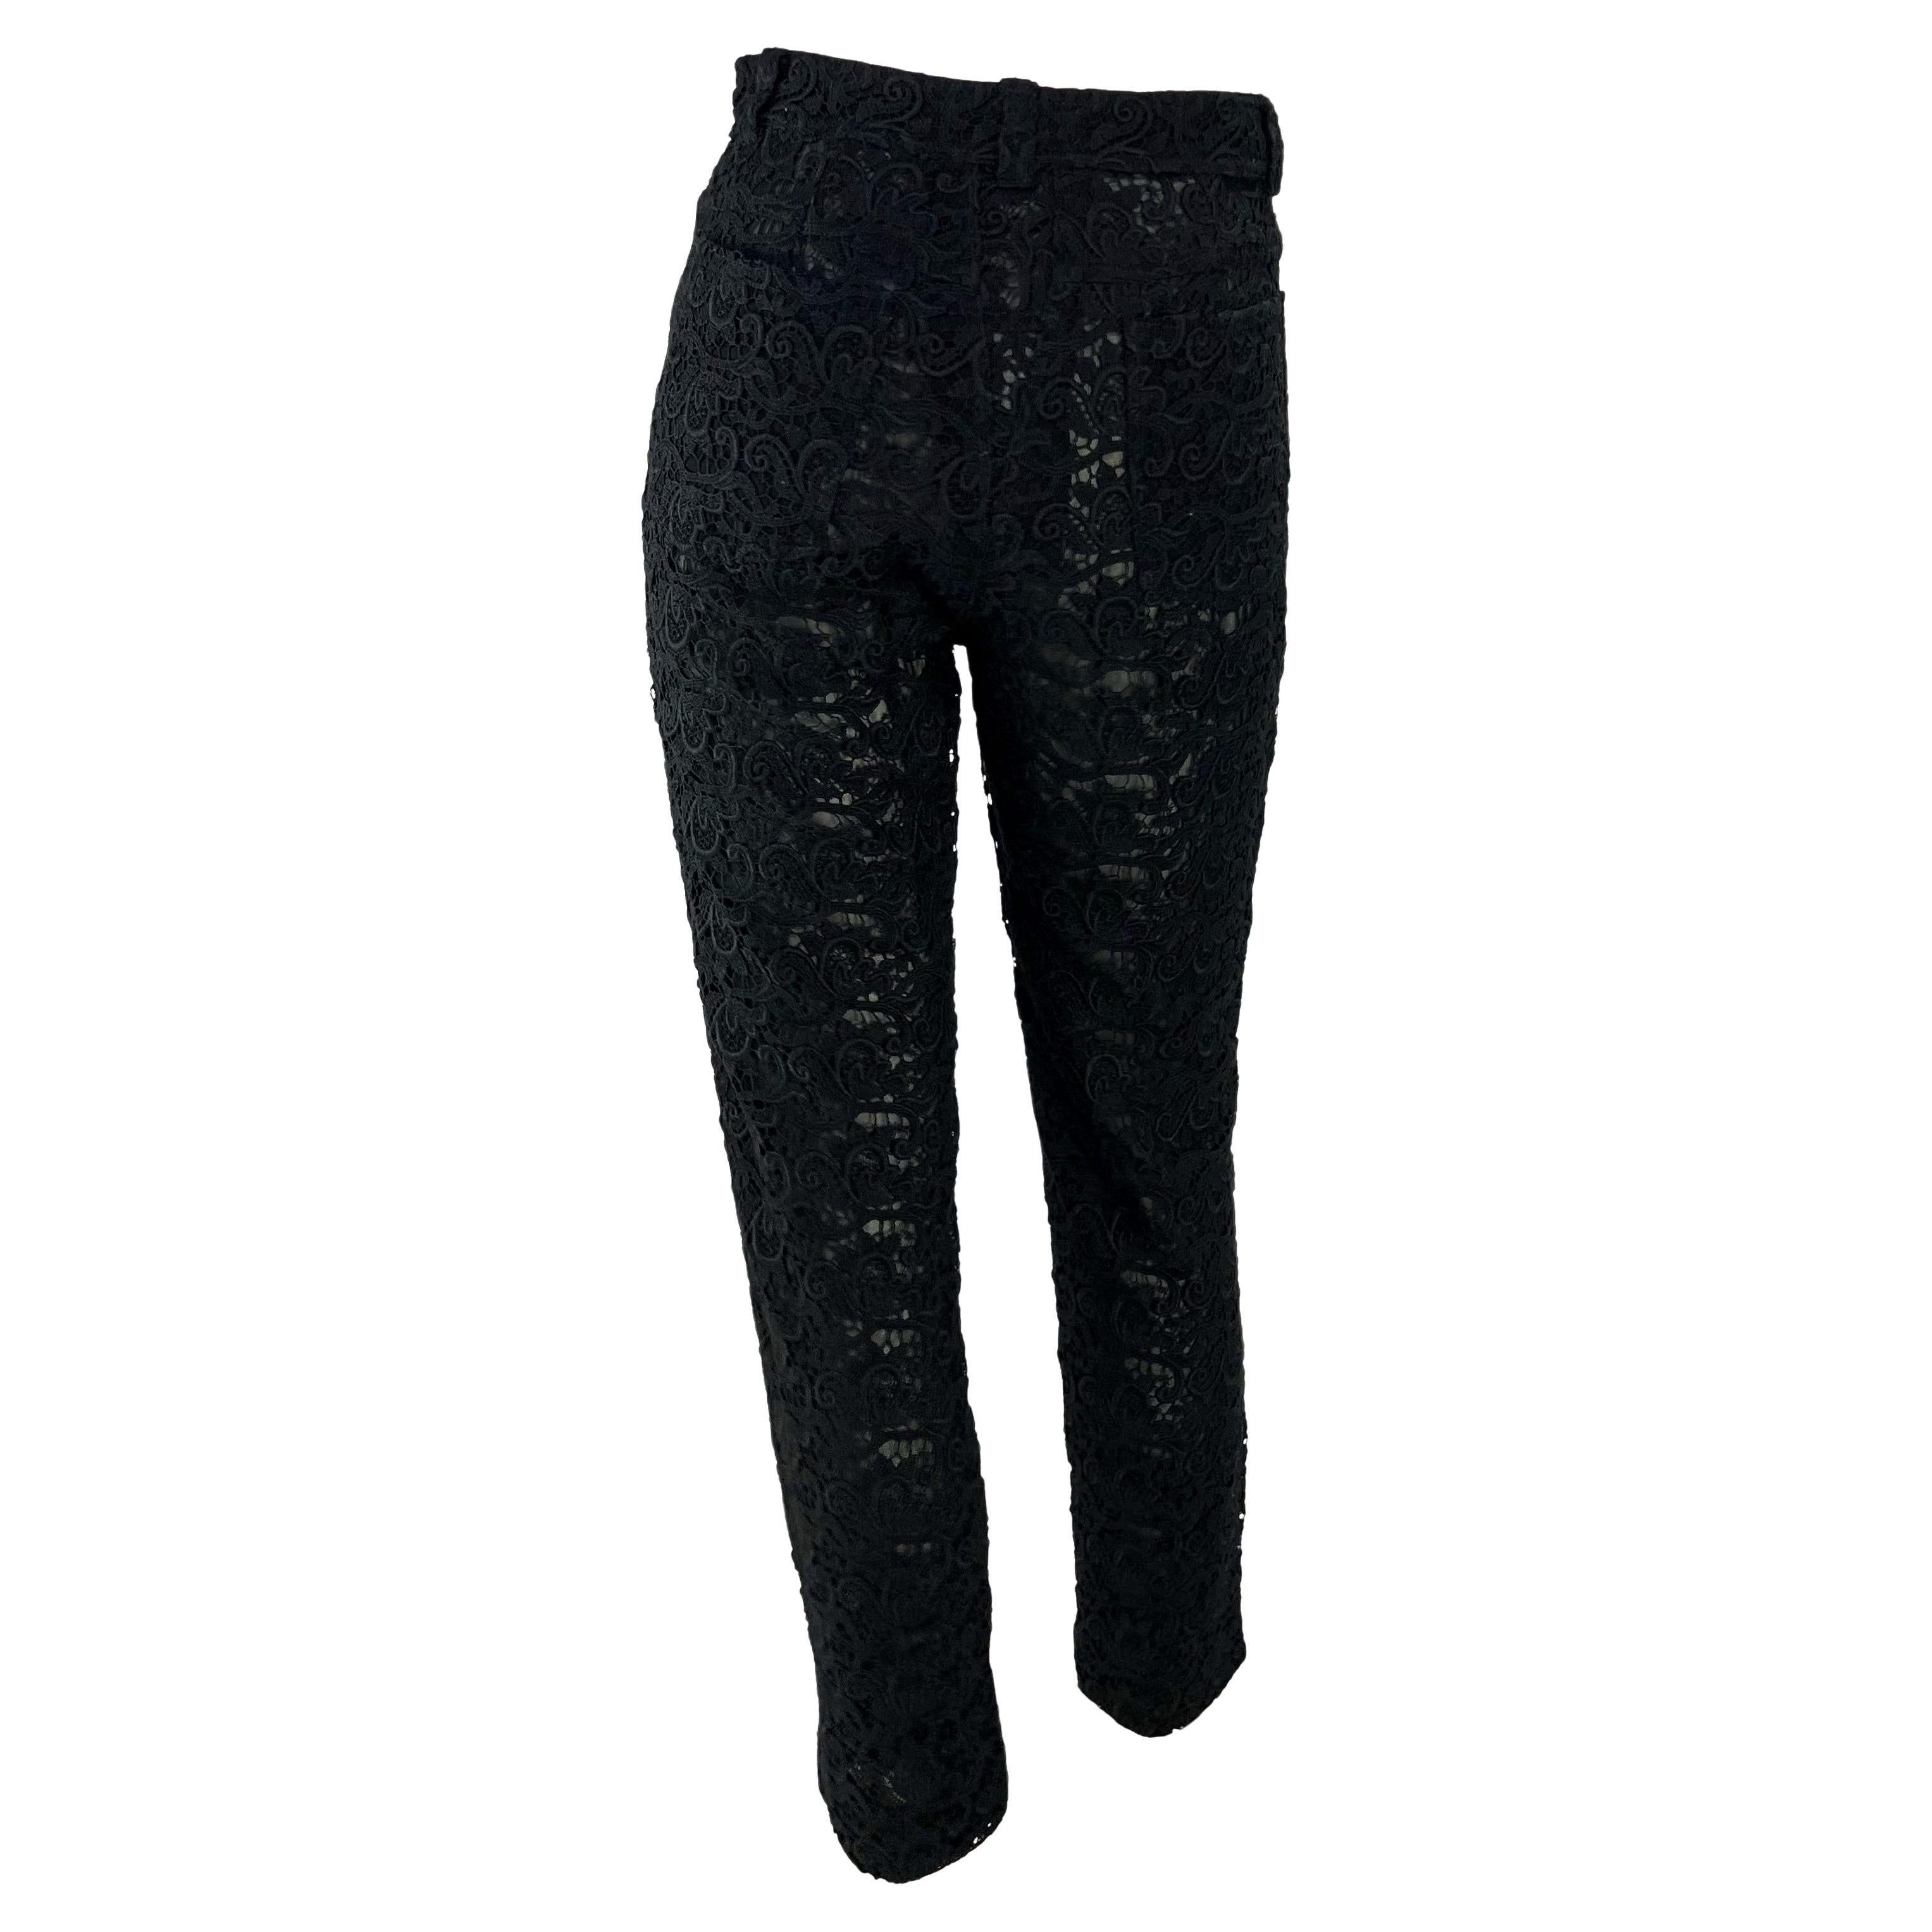 S/S 1994 Gianni Versace Sheer Black Lace Jeans Pants In Excellent Condition For Sale In West Hollywood, CA